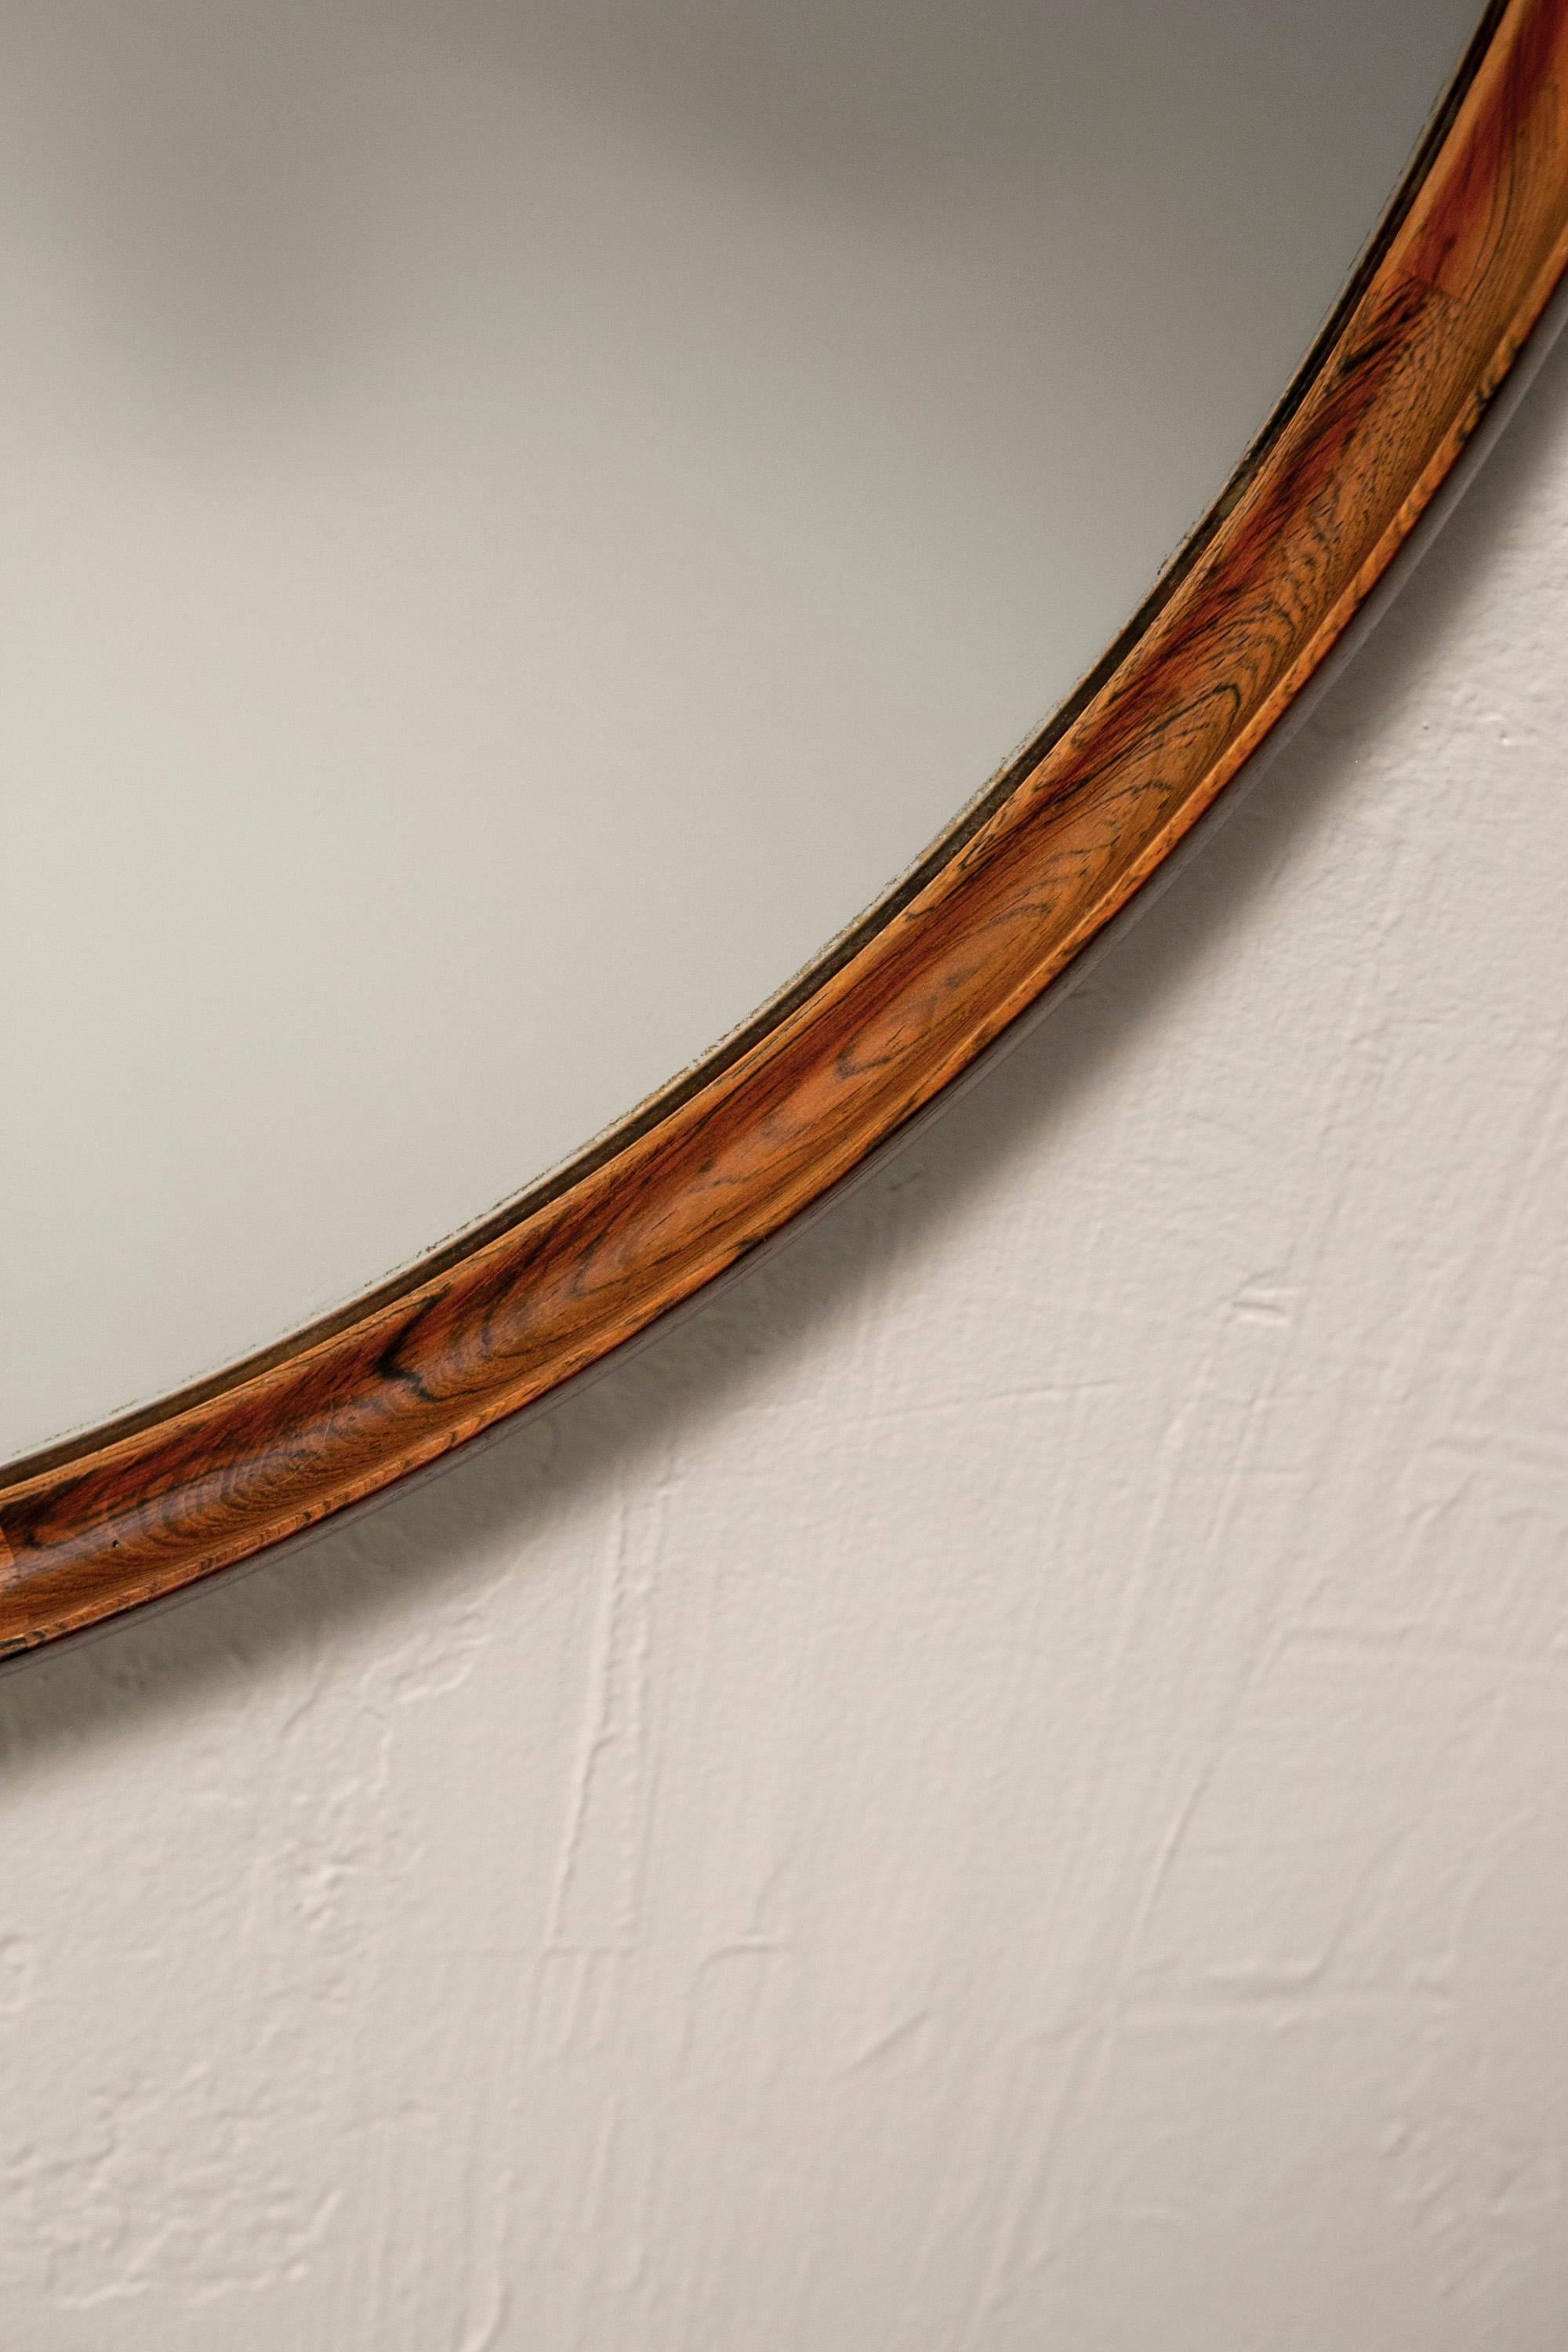 Uno & Östen Kristiansson, Round Rosewood mirror by Luxus, Vittsjö. Sweden, 1960s

This stunning vintage round rosewood mirror is exquisitely framed in the most amazing rosewood grain. Made in Sweden in the 1960s this is fantastic piece for an